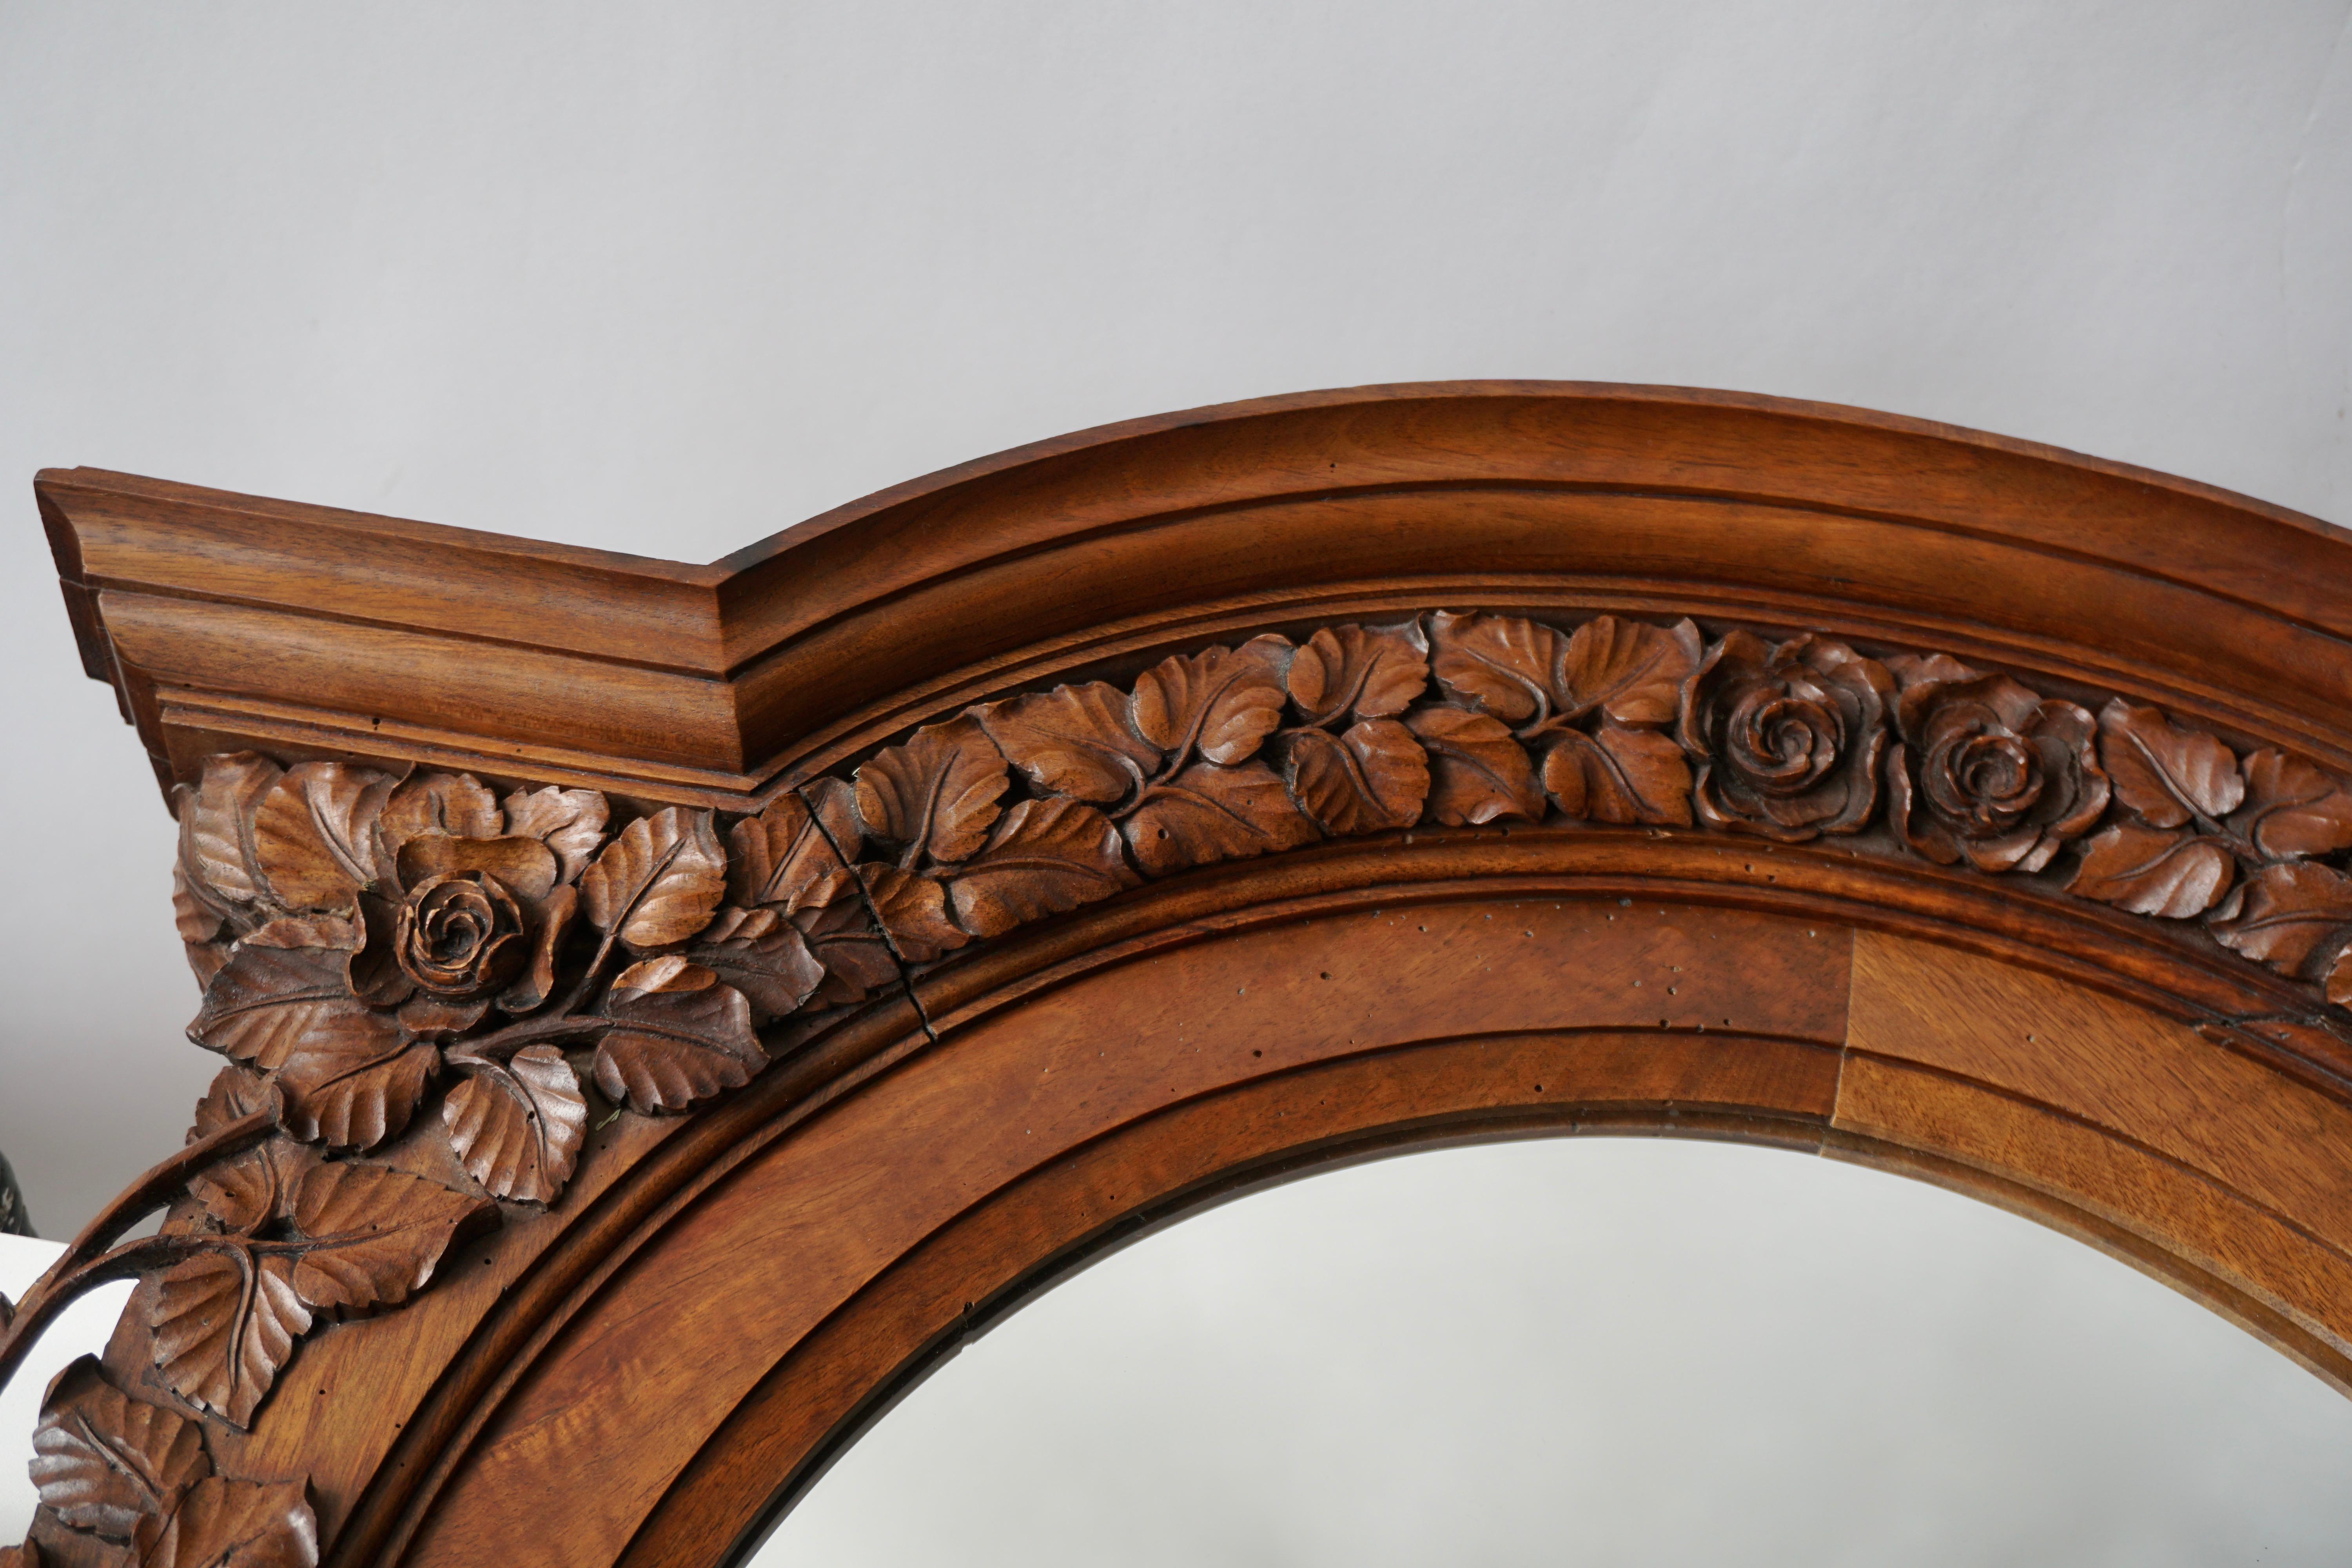 An impressive Italian carved wood wall plaque with center mirror from the early 20th century. This antique wall decoration from Italy features ornate three dimensional hand carvings in a shell, floral, and scrolling leaf motif, about a framed mirror